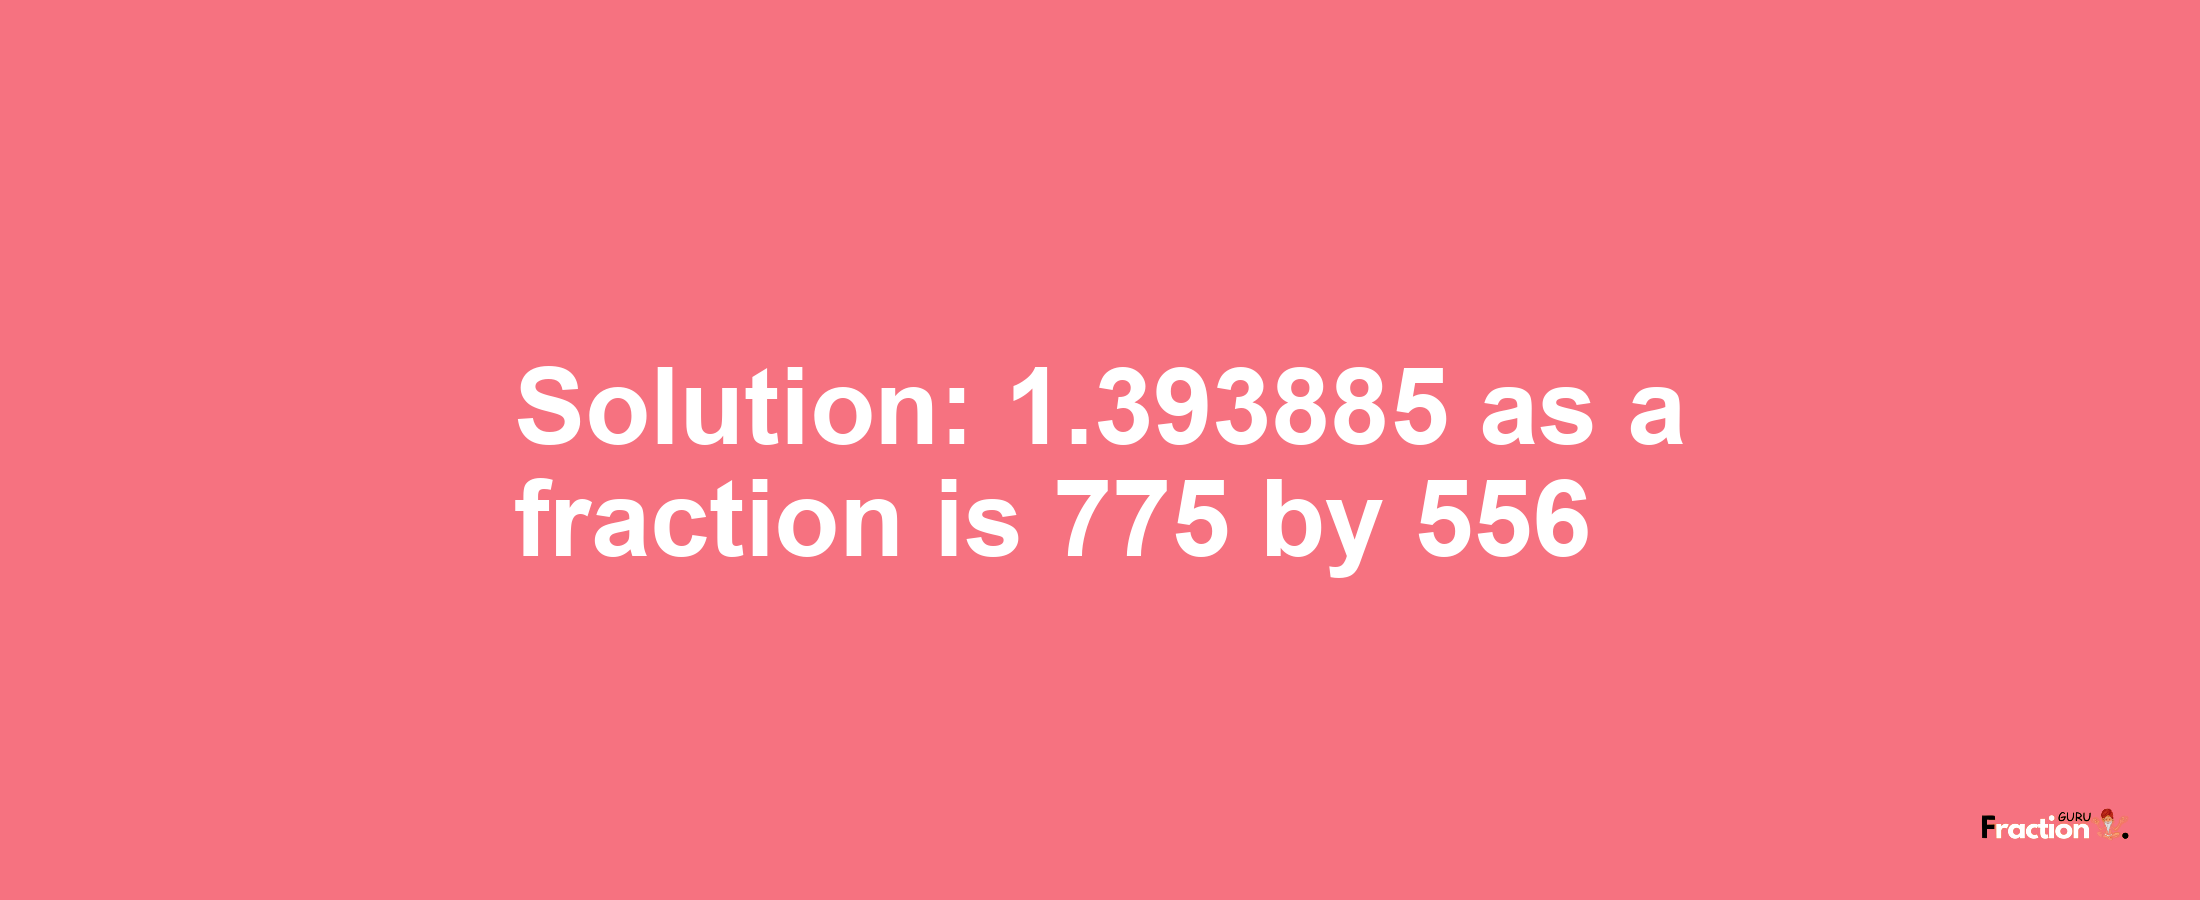 Solution:1.393885 as a fraction is 775/556